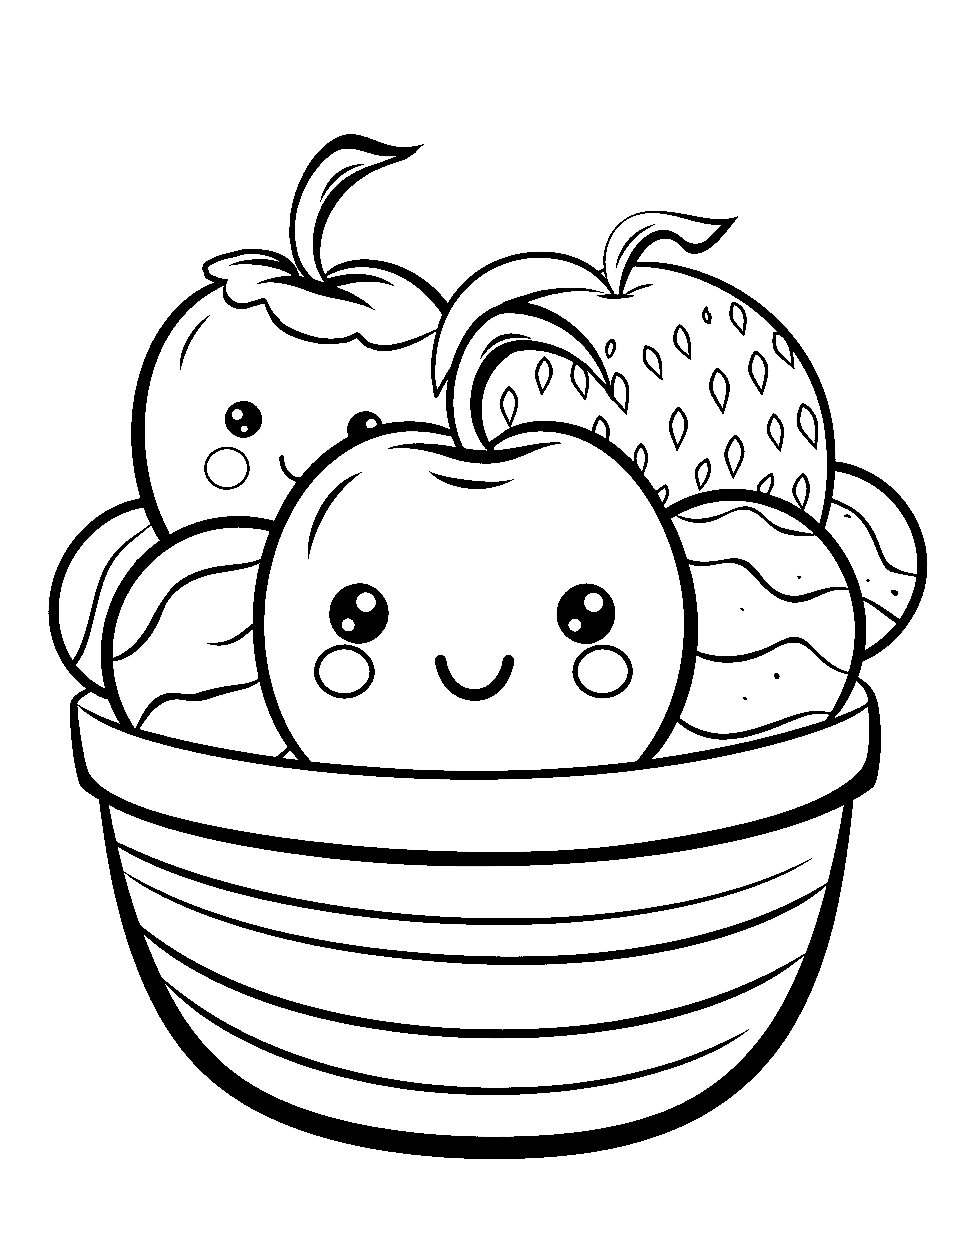 Cute Fruit Basket Food Coloring Page - A basket filled with kawaii fruits.